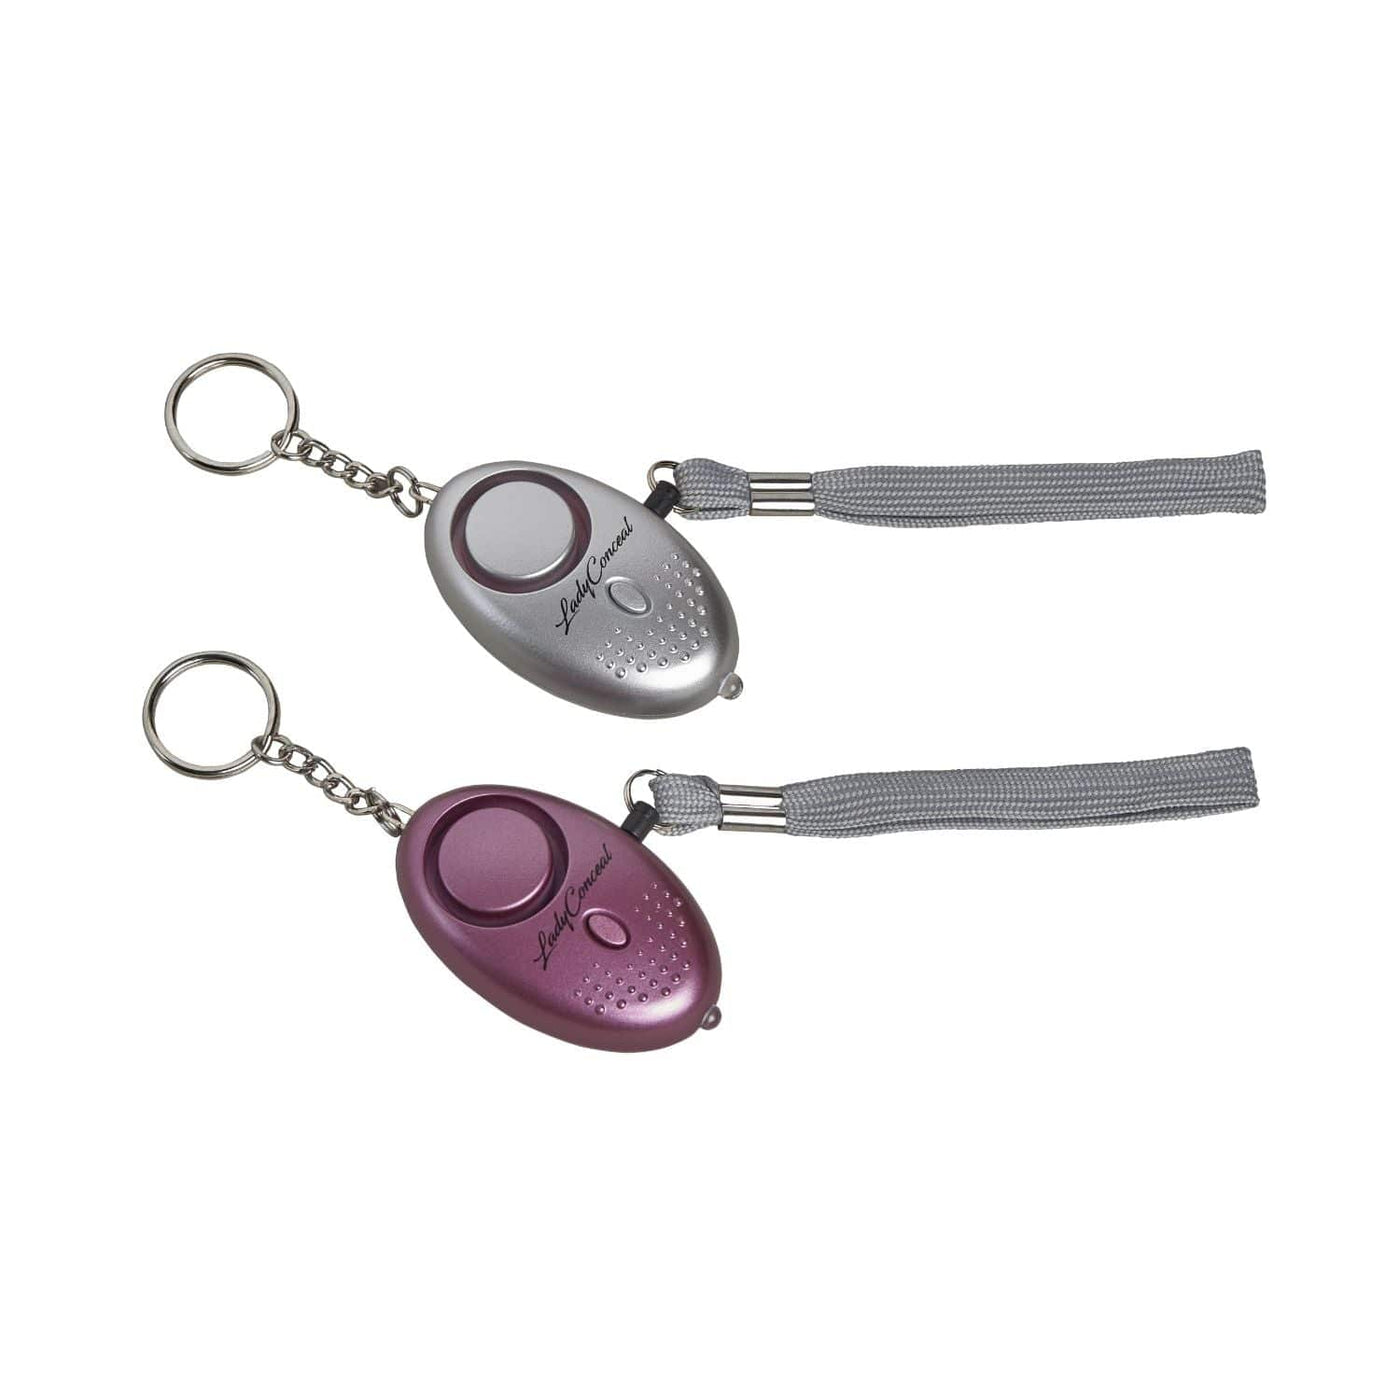 Lady Conceal Alarms Personal Self-Defense Security Alarm Keychains